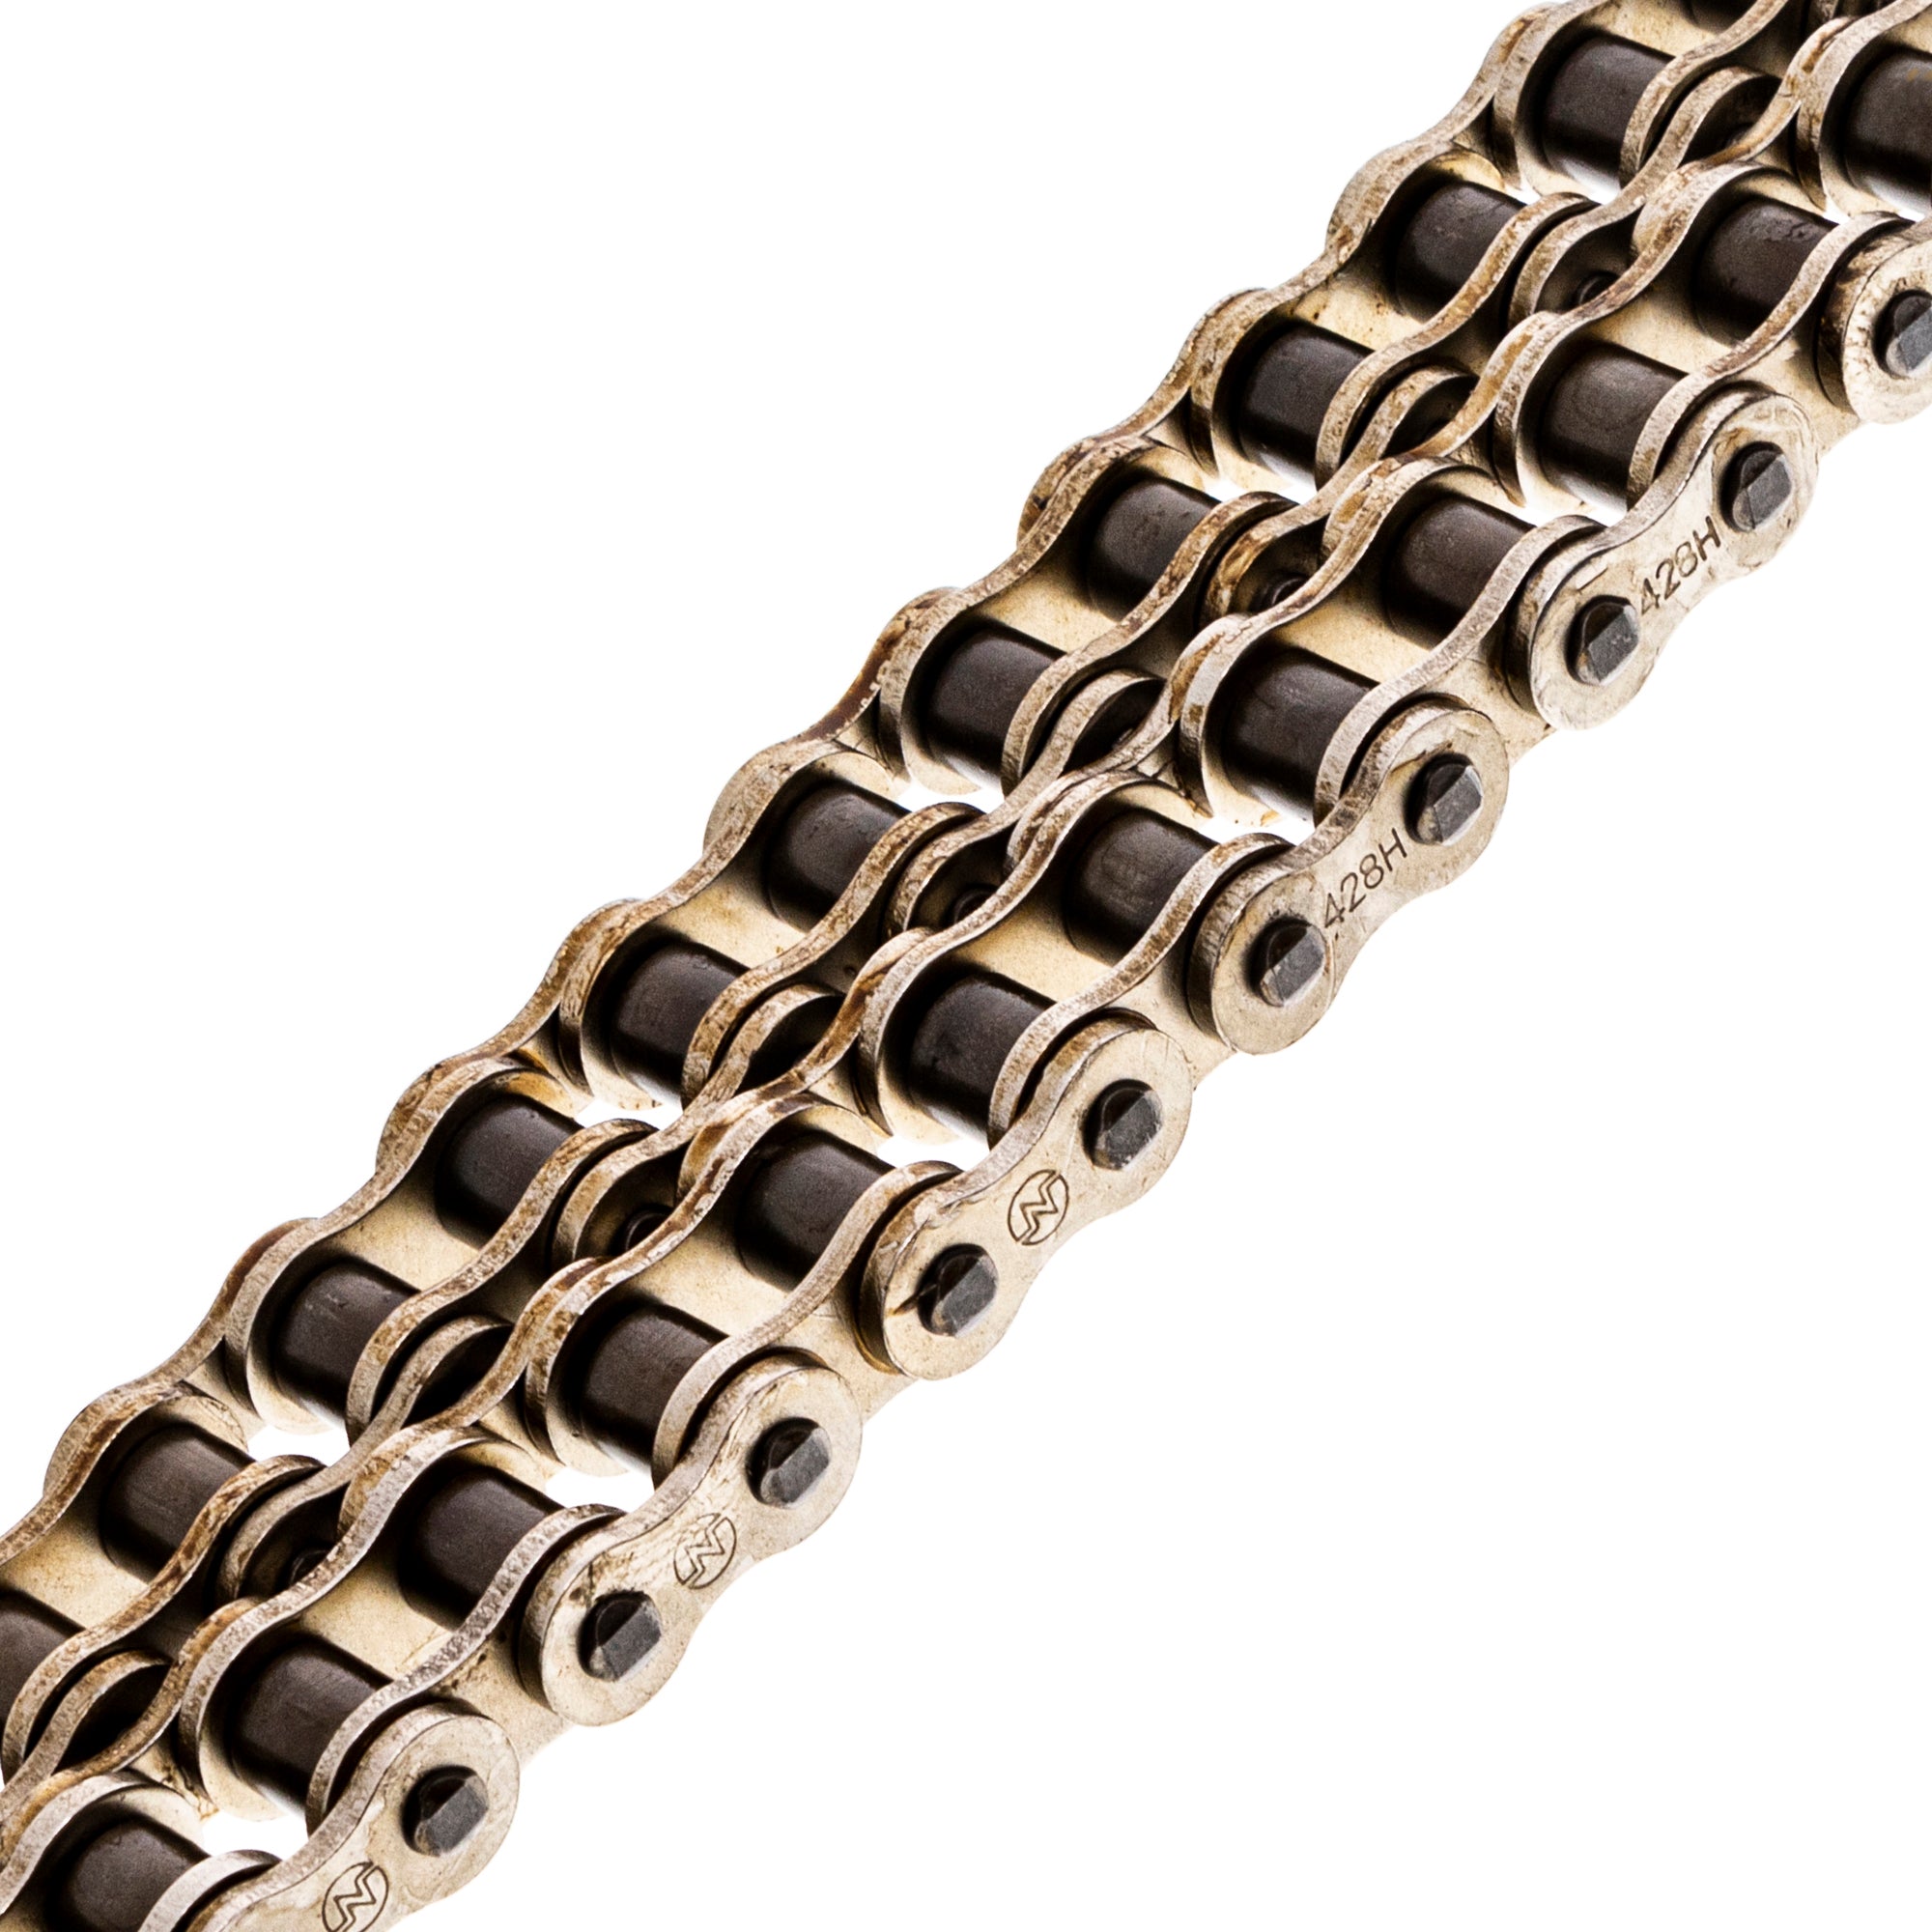 Drive Chain 146 Standard Non O-Ring w/ Master Link for zOTHER Daystar 5248 NICHE 519-CDC2359H